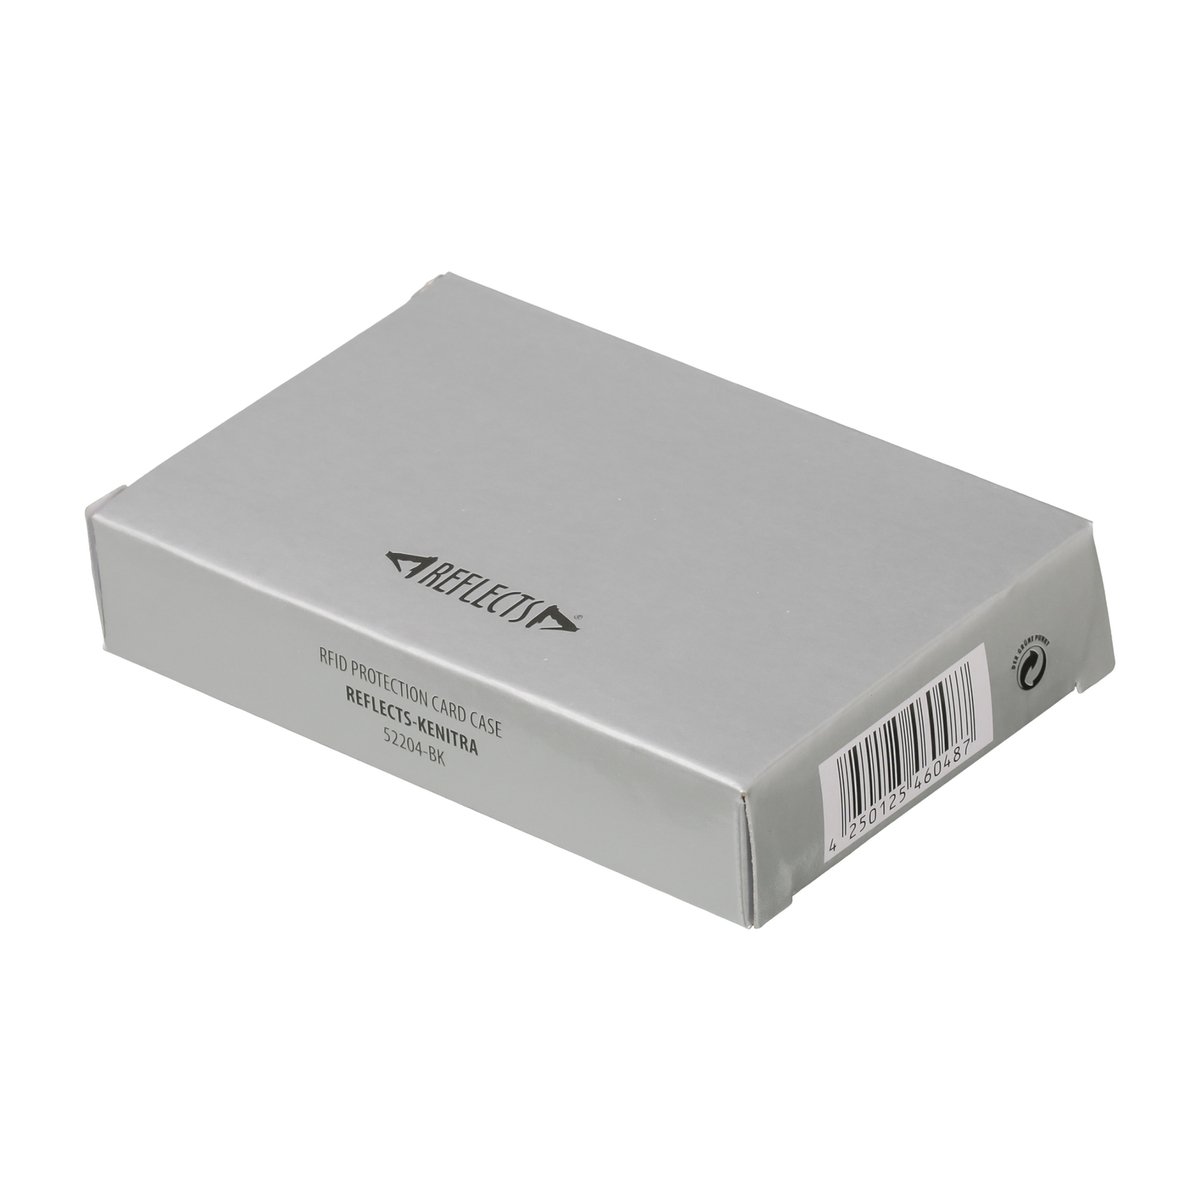 RFID Protection Card Case RE98-KENITRA silver